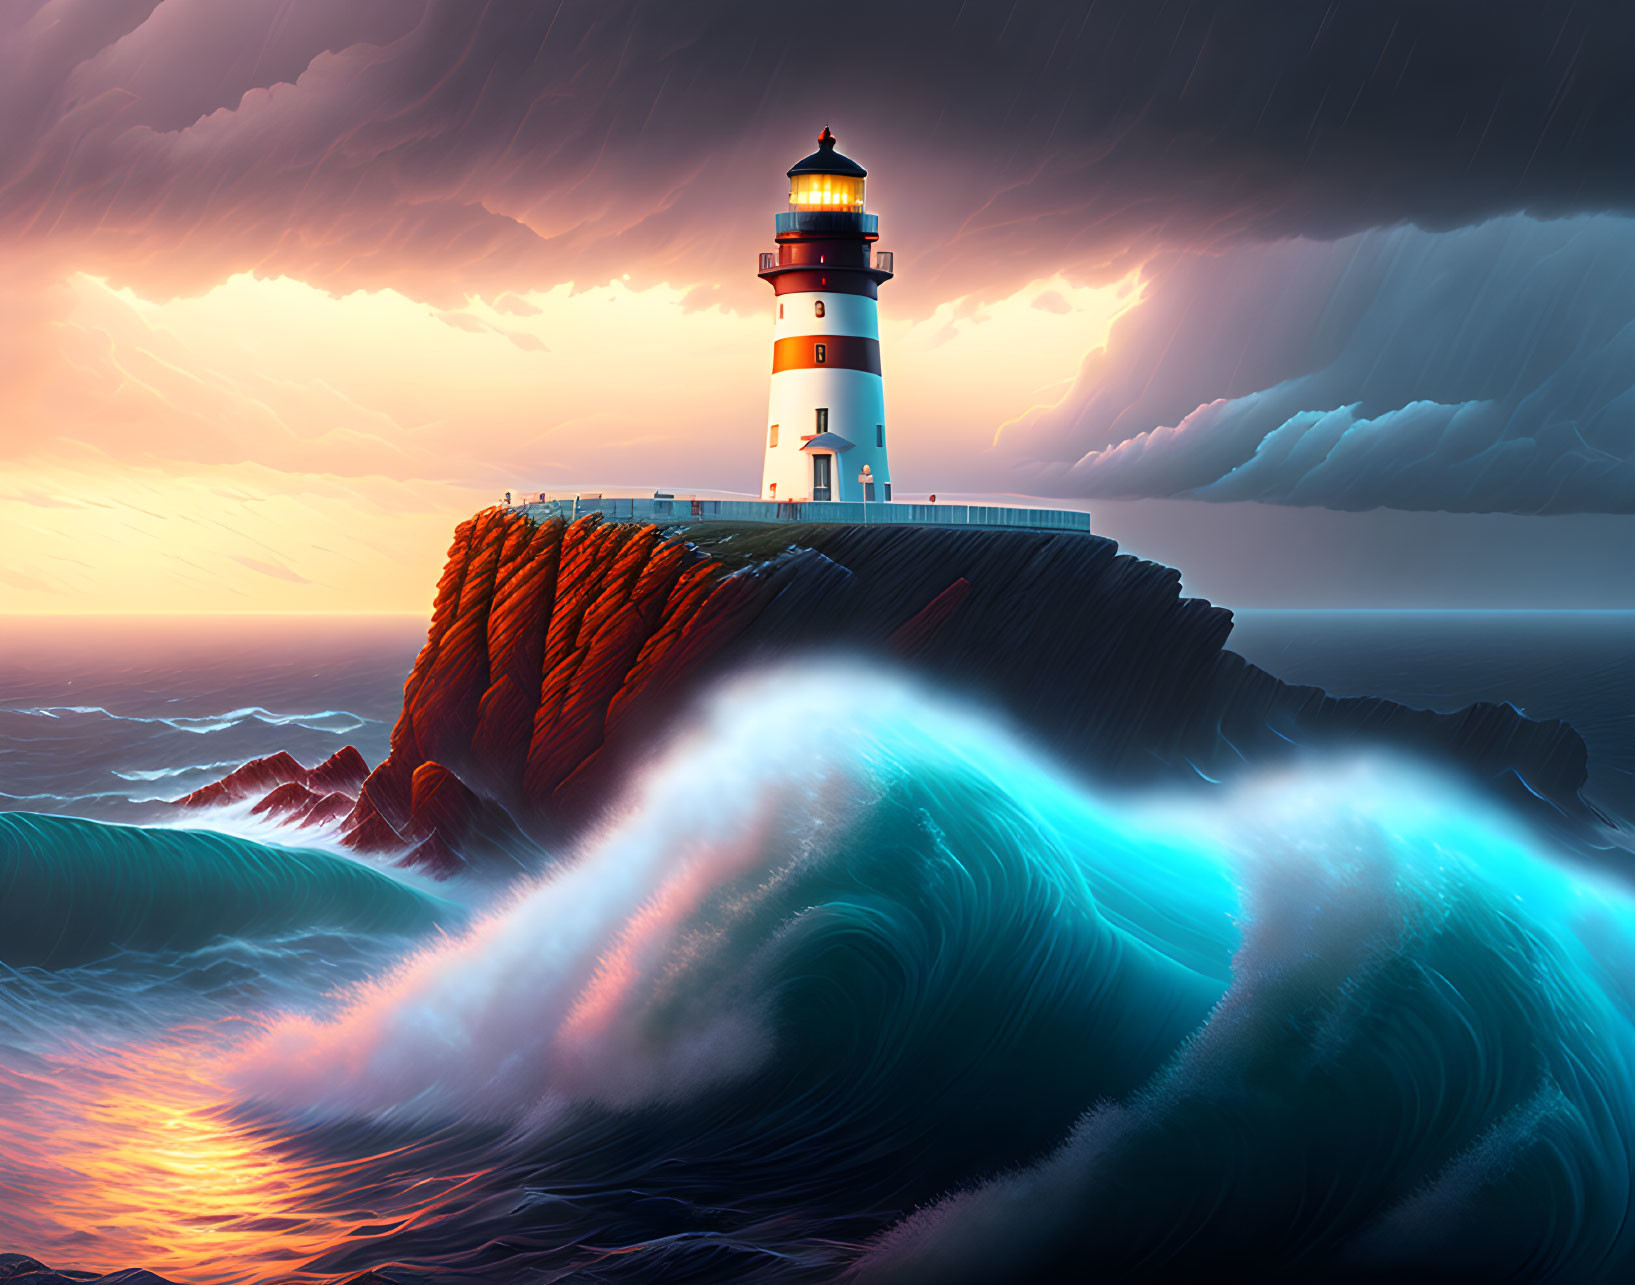 Lighthouse on craggy cliff with stormy sky and crashing waves at sunset